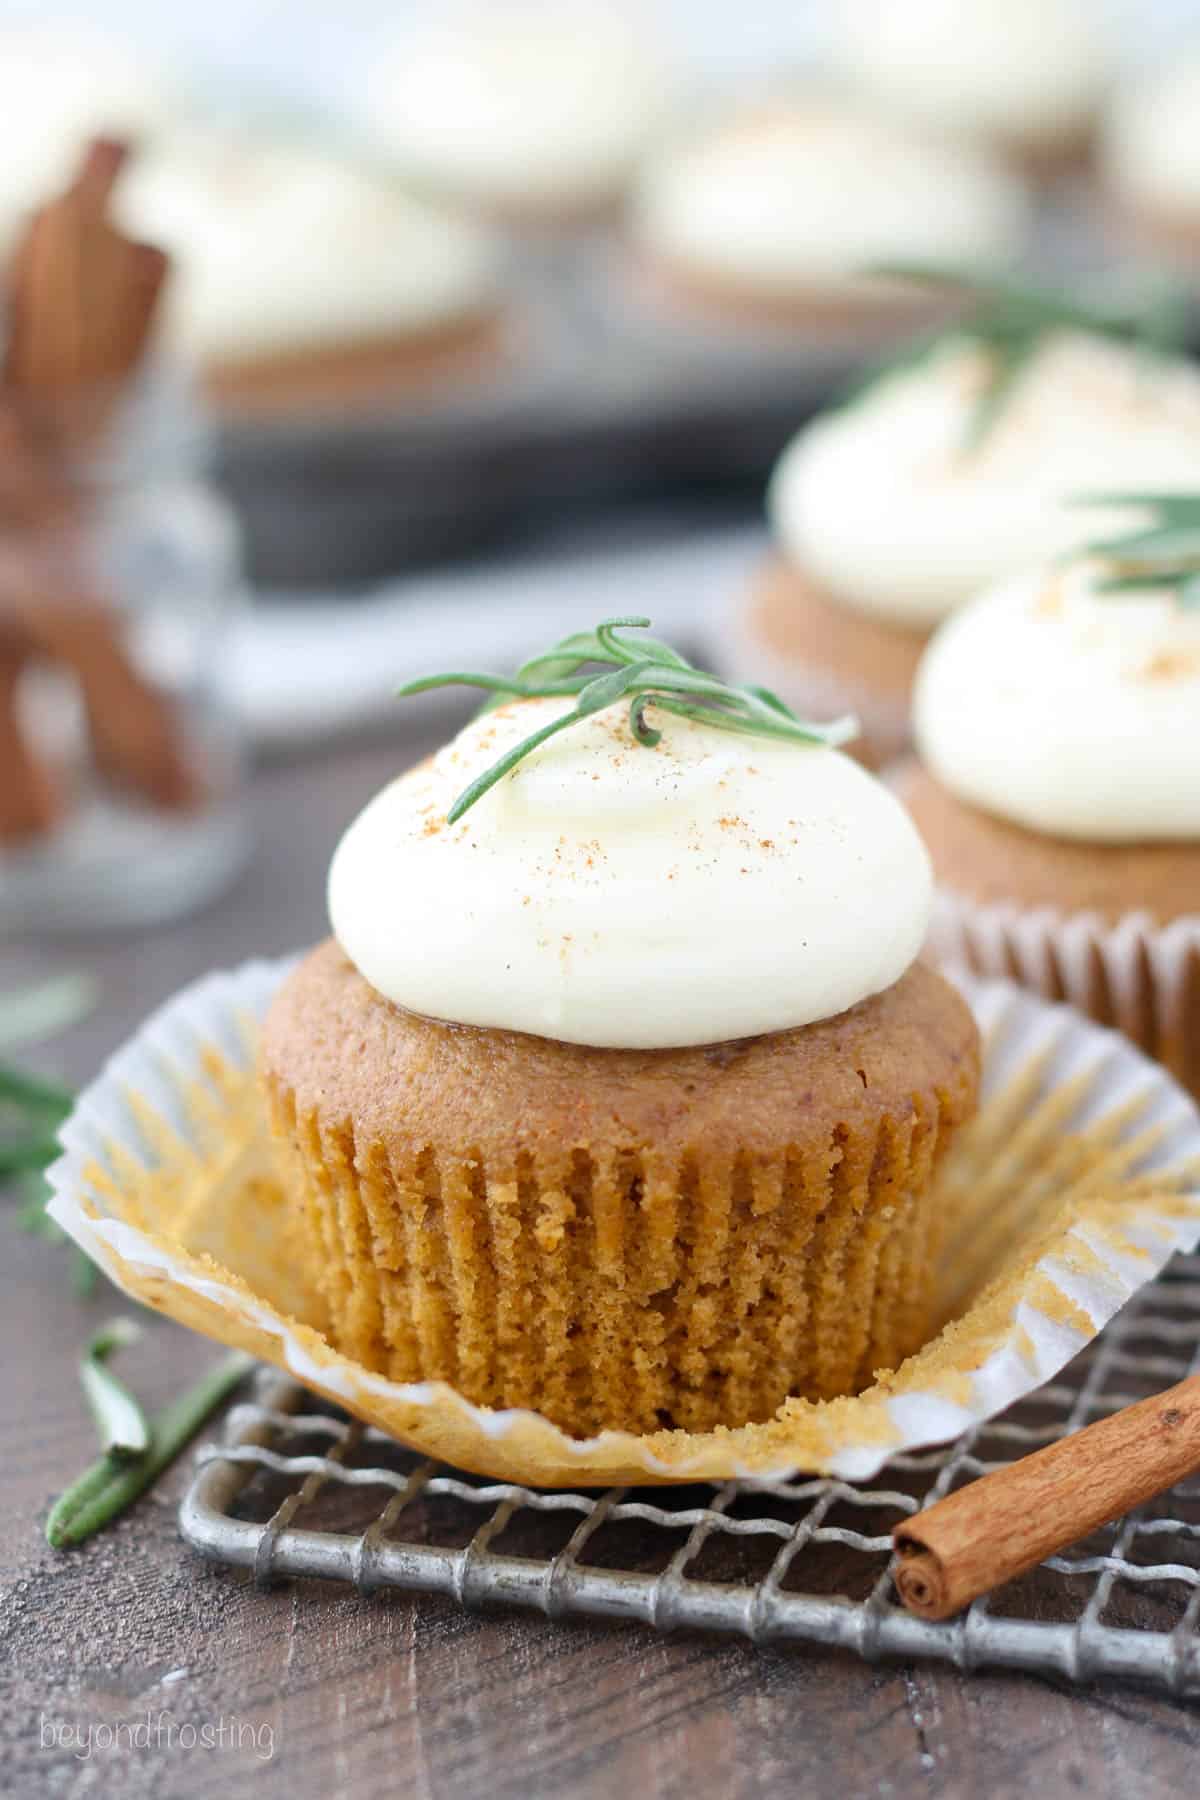 https://beyondfrosting.com/wp-content/uploads/2018/12/Gingerbread-Cupcakes-011.jpg